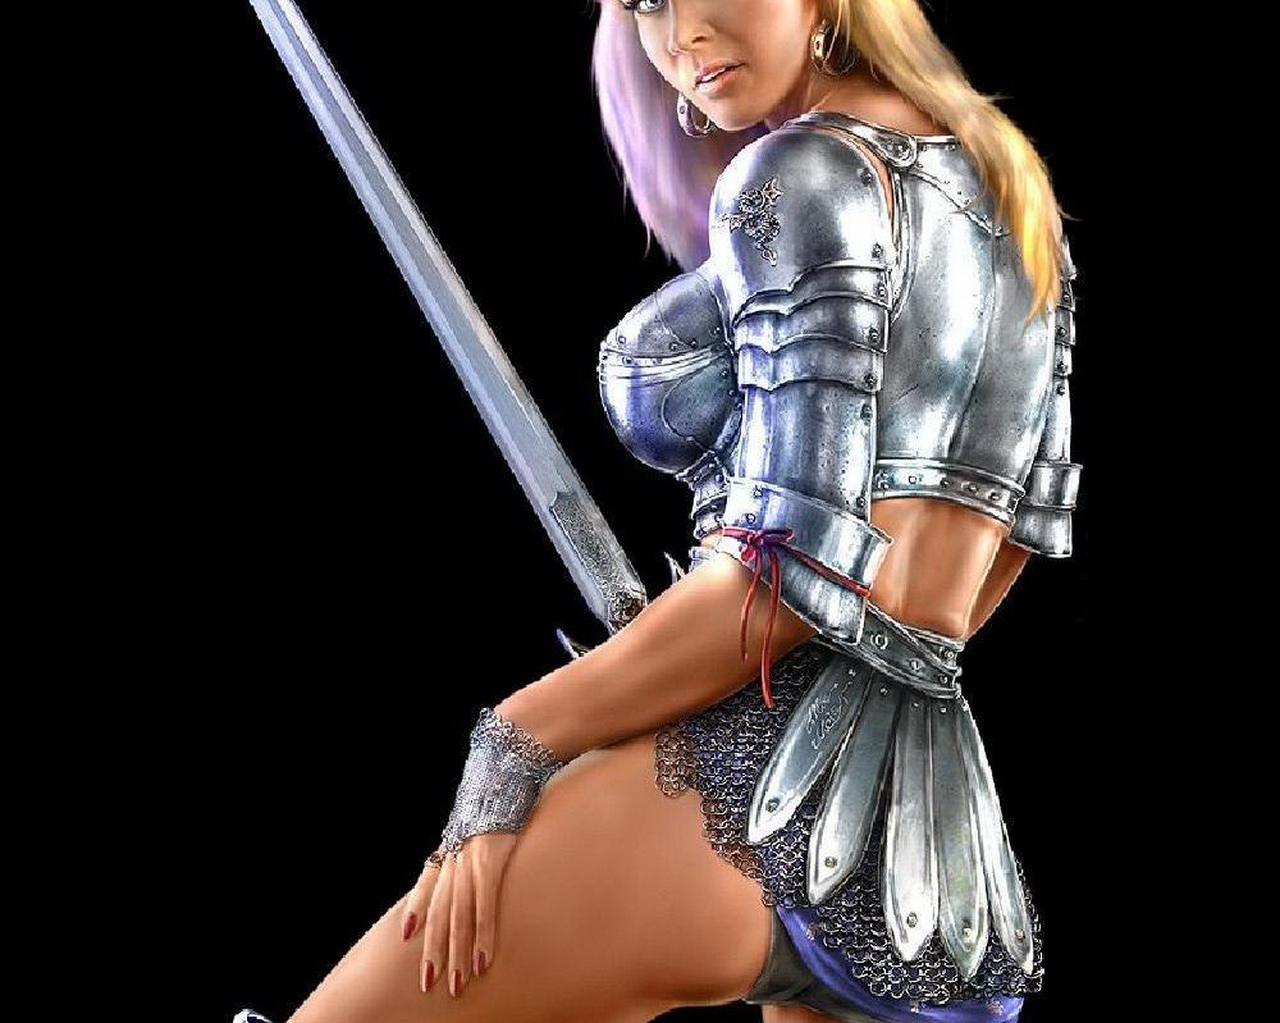 Warrior sexy exploited images